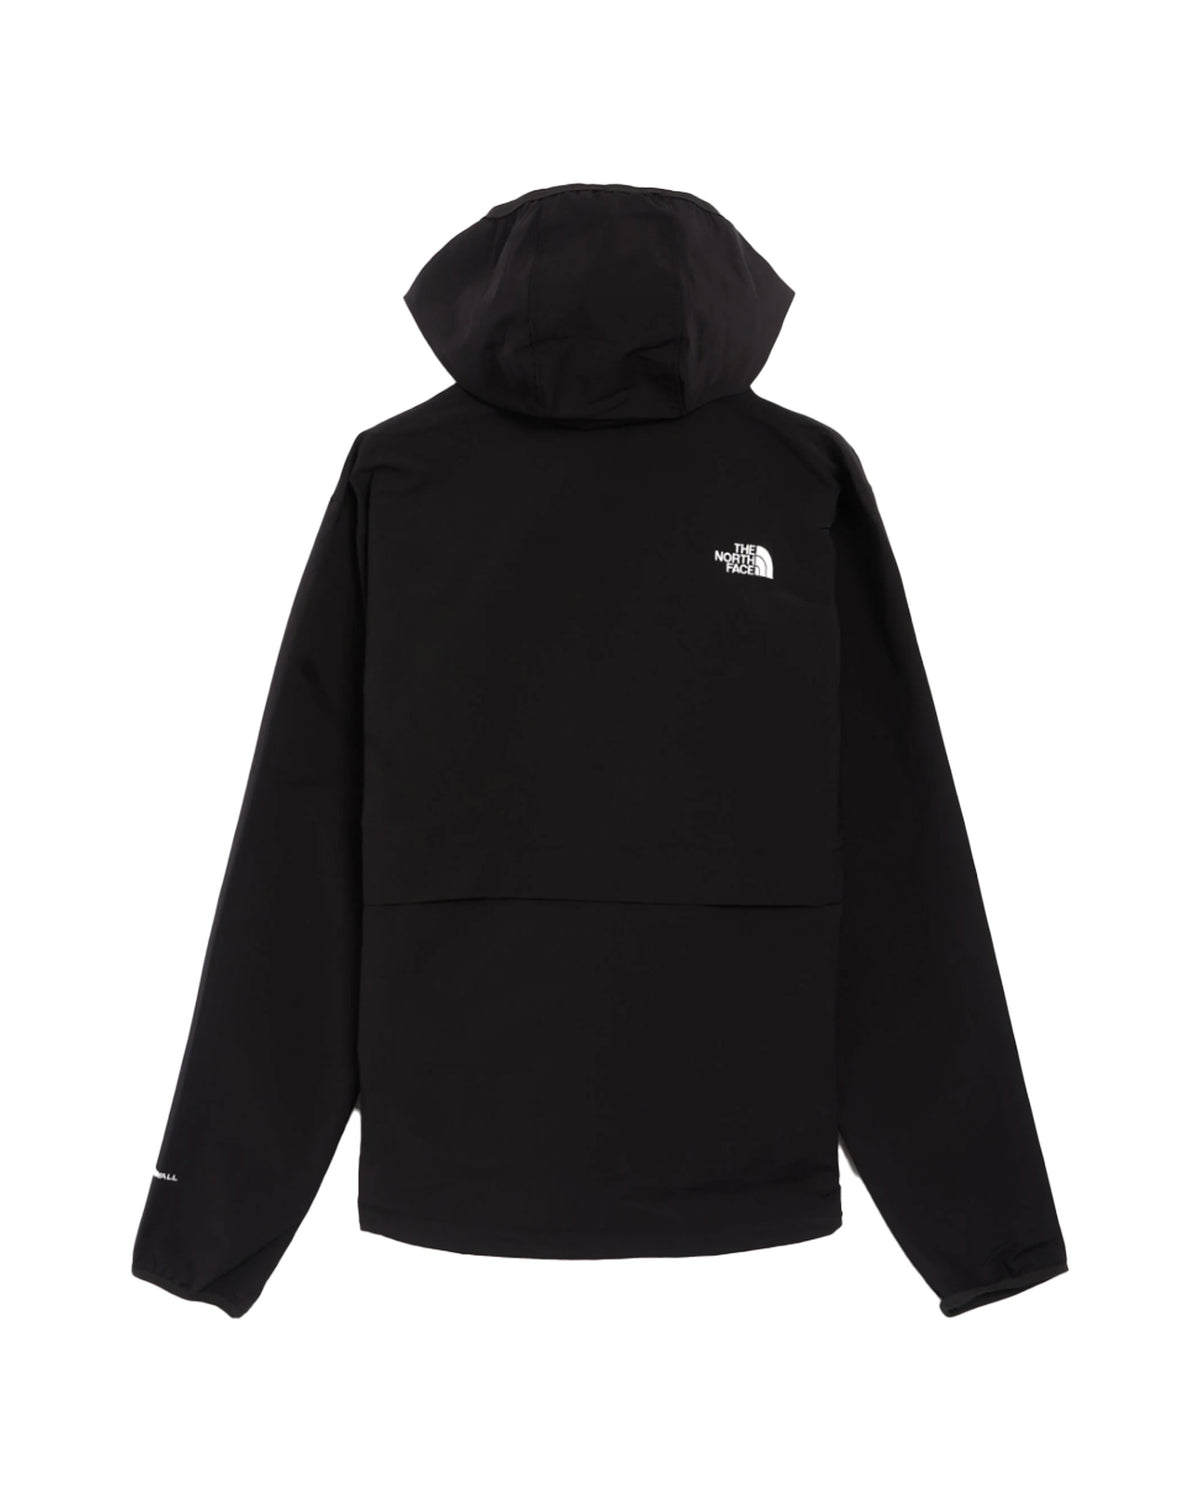 Giacca Uomo The North Face Easy Wind FZ Jacket Black